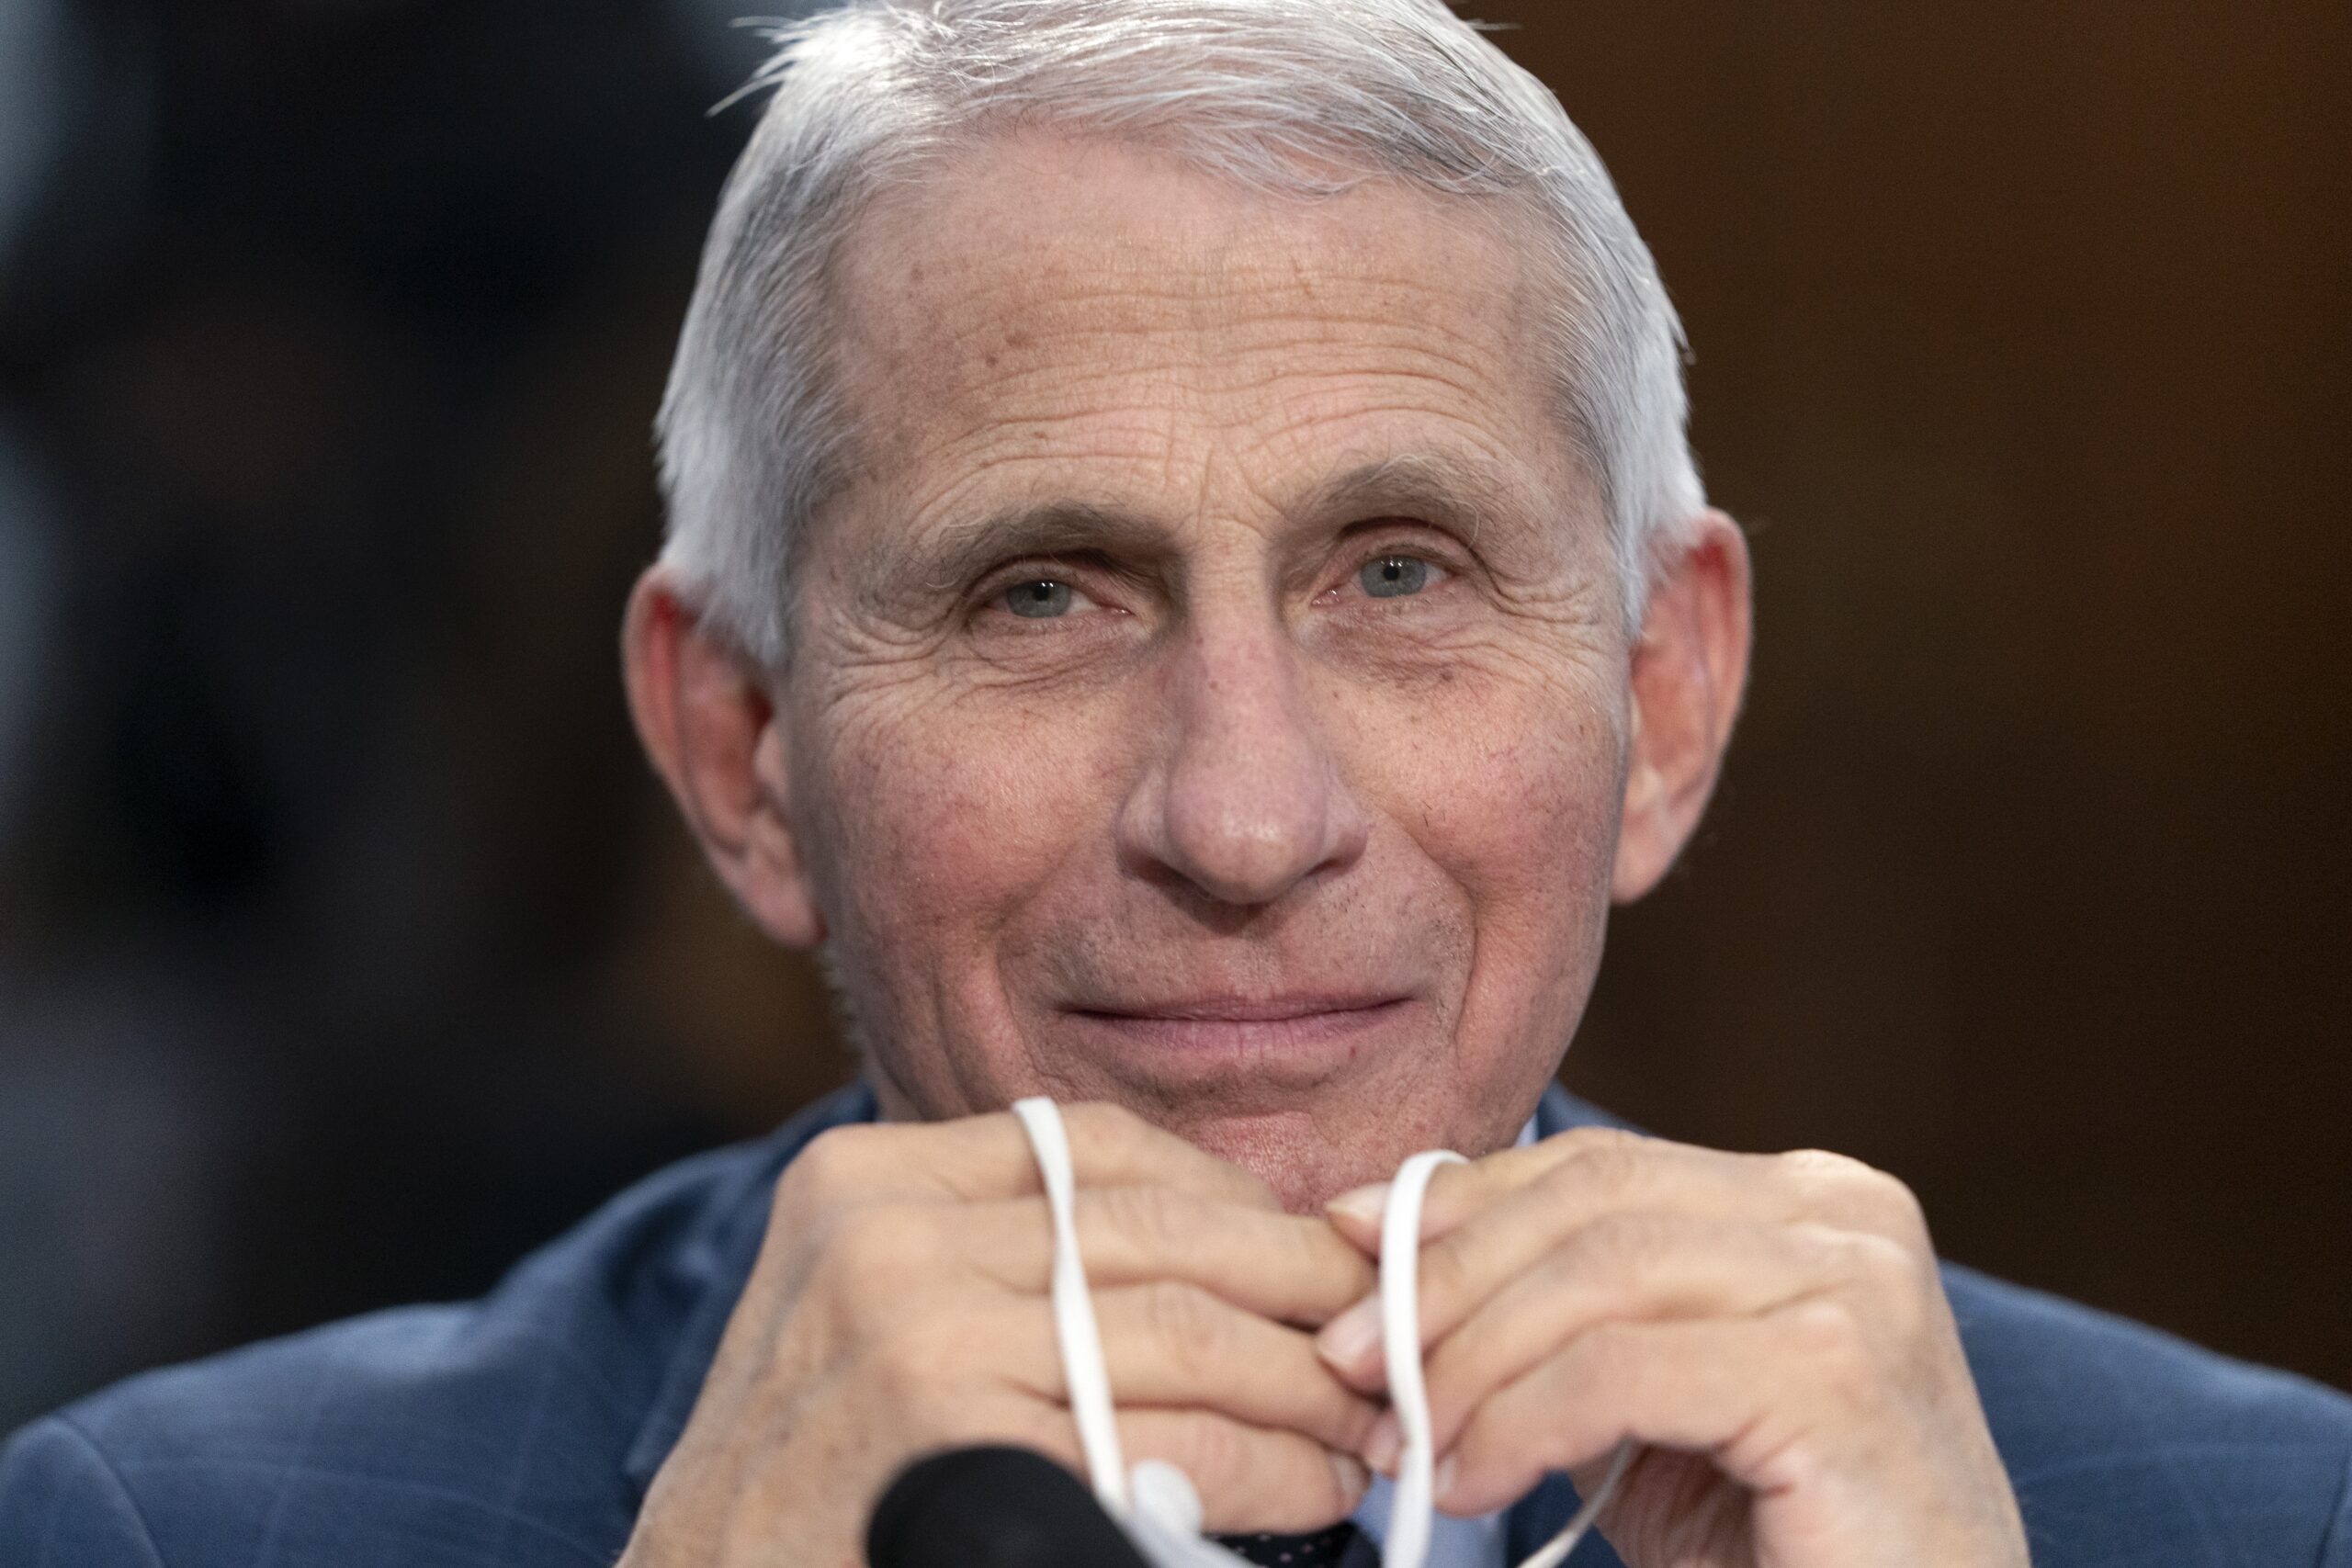 FILE - Dr. Anthony Fauci, Director of the National Institute of Allergy and Infectious Diseases, holds his face mask in his hands as he attends a House Committee on Appropriations subcommittee hearing on about the budget request for the National Institutes of Health, May 11, 2022, on Capitol Hill in Washington. Fauci, the government’s top infectious disease expert, says he plans to retire by the end of President Joe Biden’s term in January 2025. Fauci, 81, became director of the National Institute of Allergy and Infectious Diseases in 1984 and has advised seven presidents. (AP Photo/Jacquelyn Martin, File)